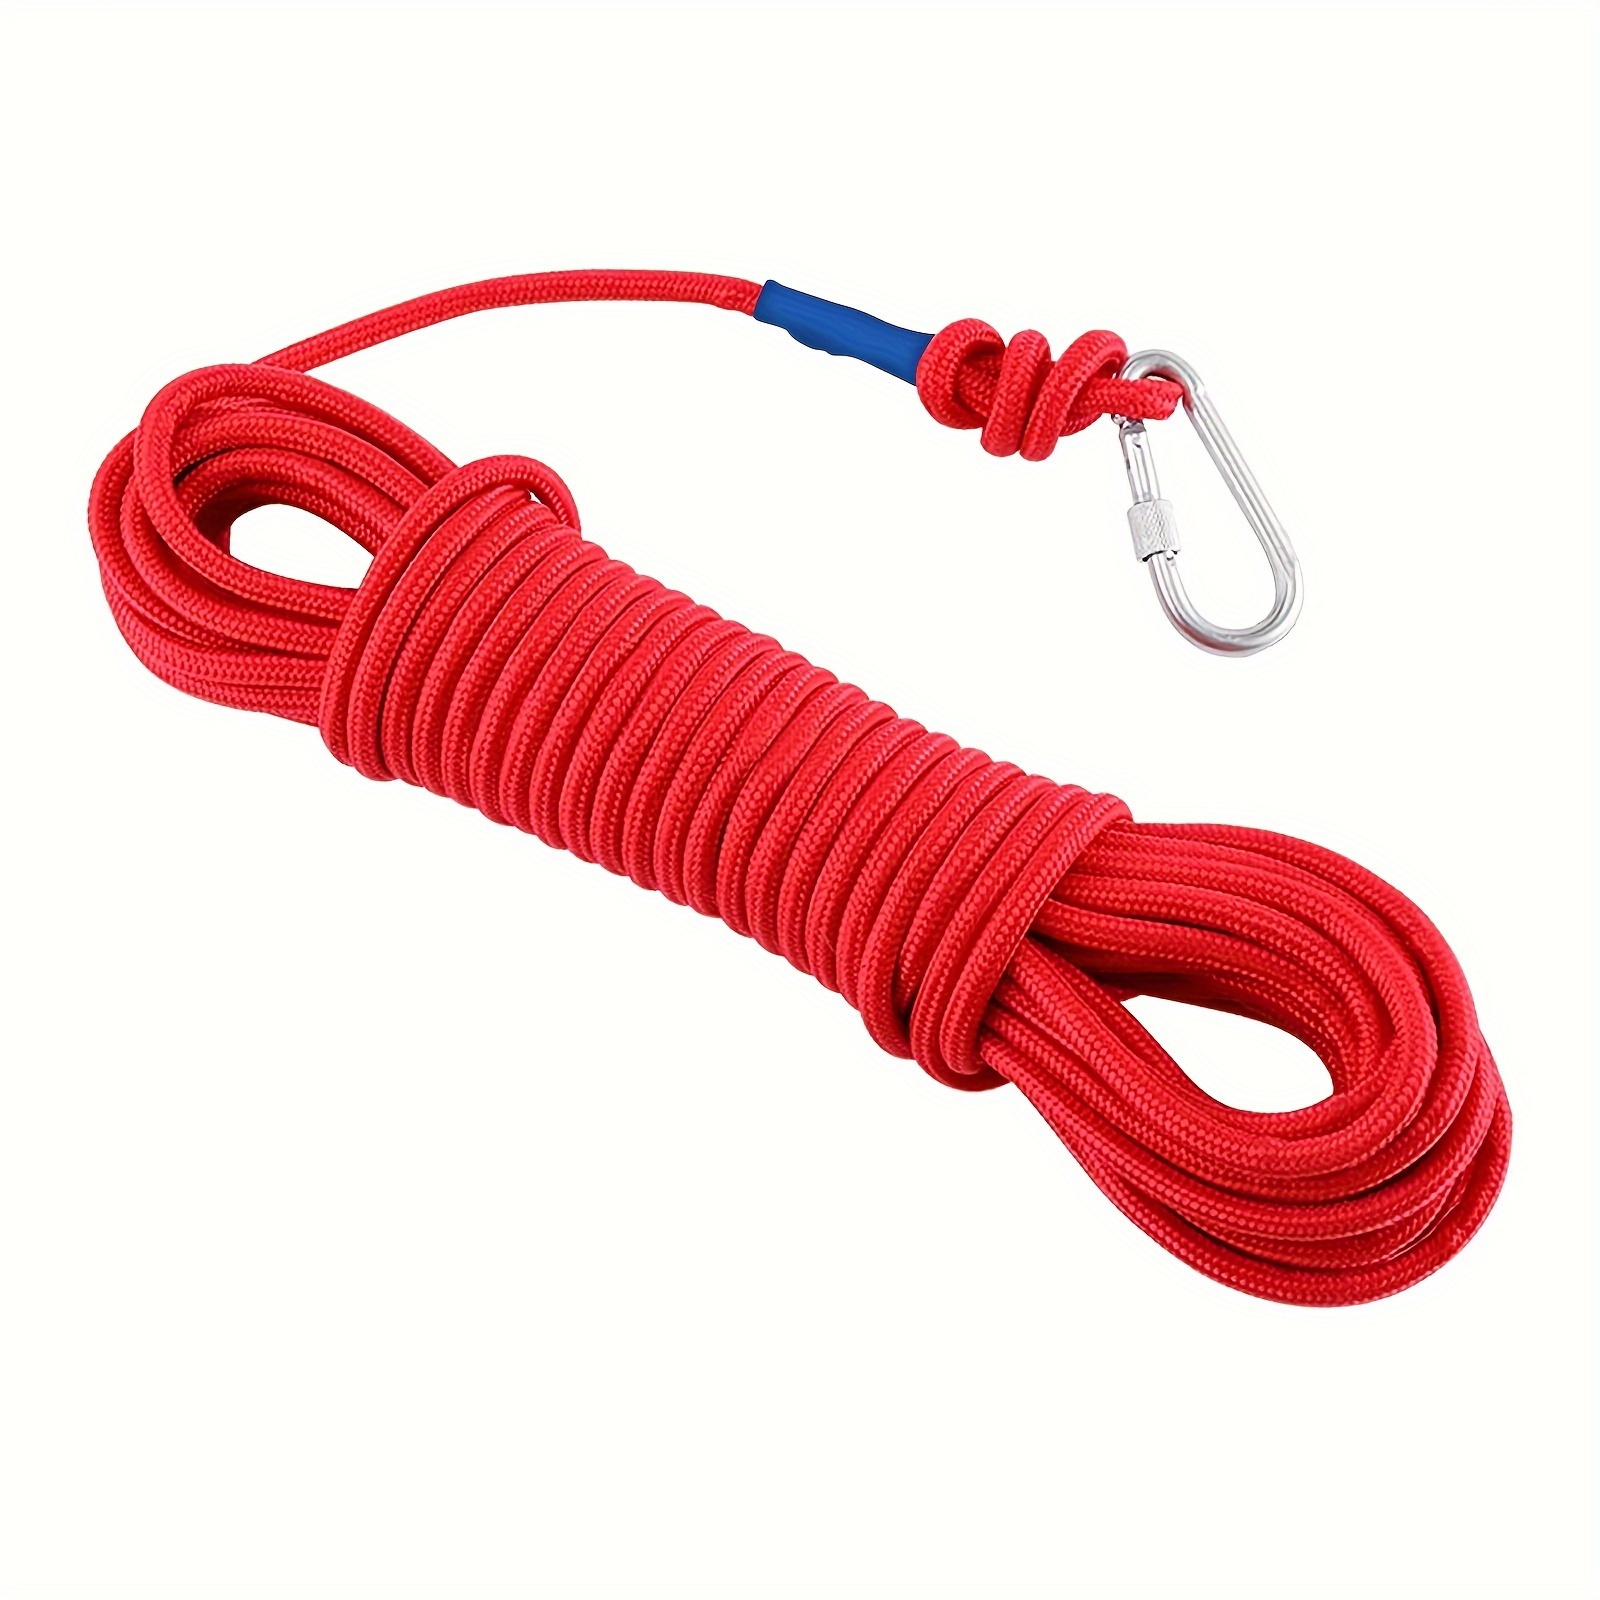 1pc 65ft/20m Red Magnet Fishing Rope With Carabiner, Durable Nylon Braided  Rope For Anchor Clothesline, Belt, Paracord Strap